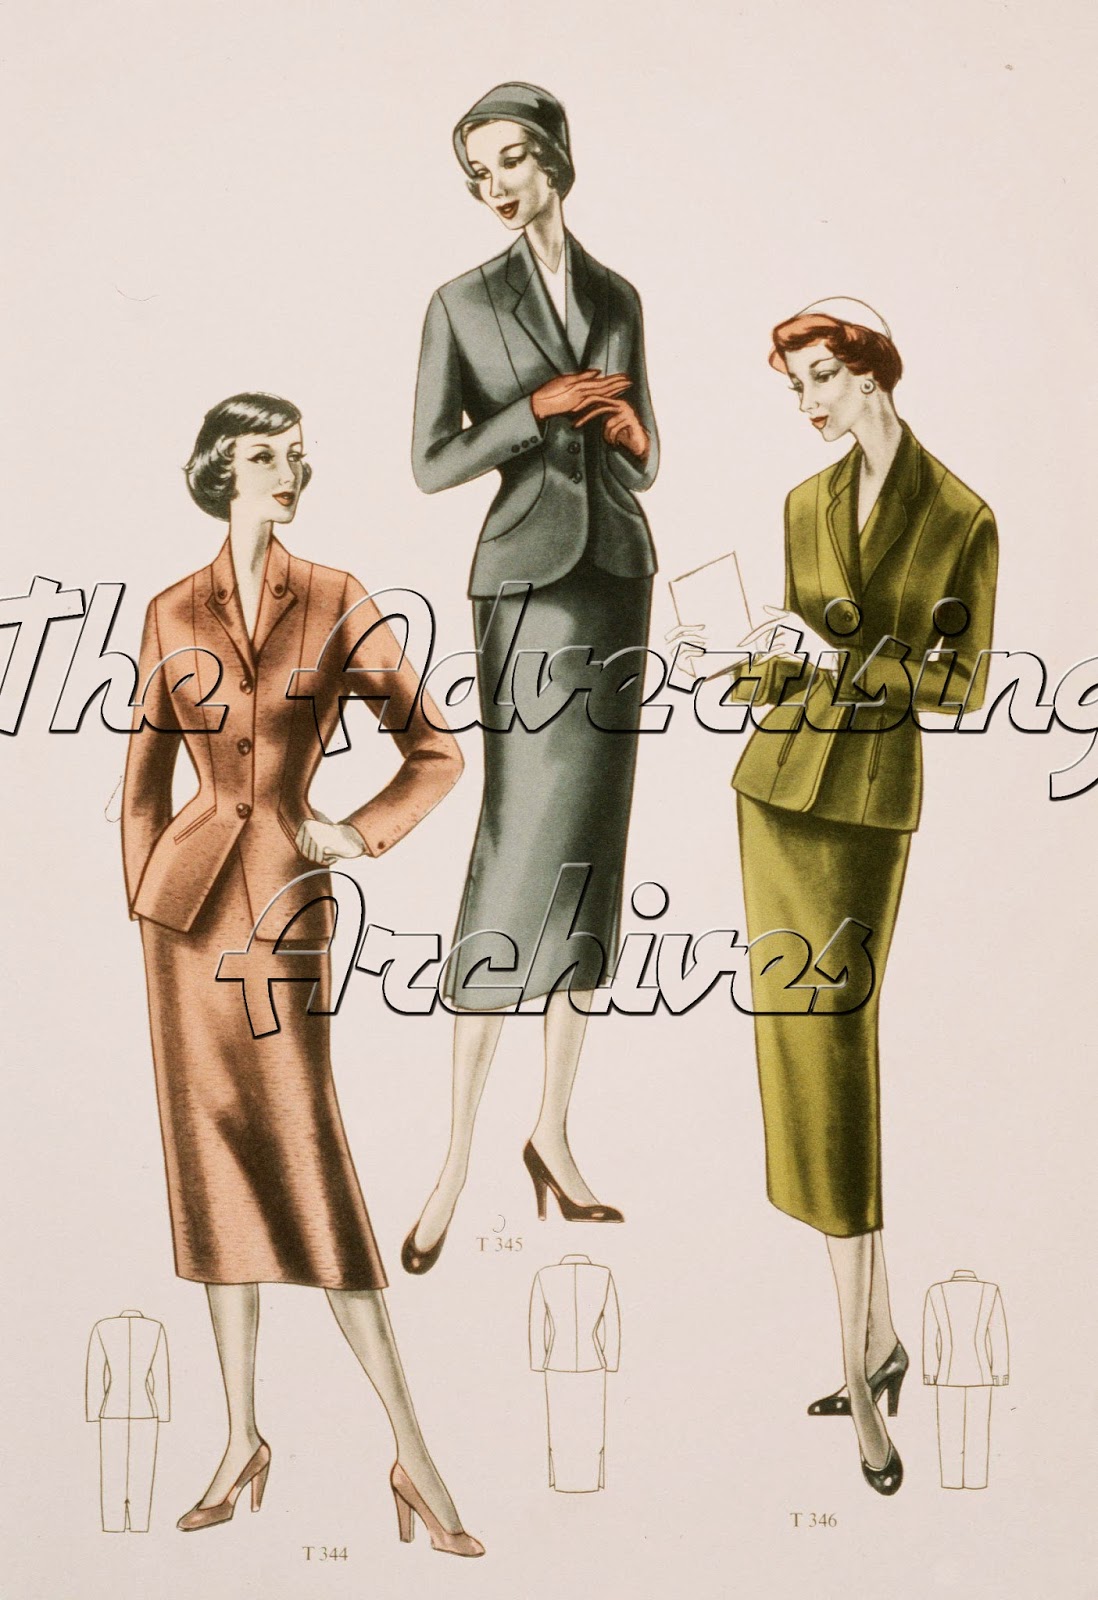 The Advertising Archives: Fashion from the 1950s!